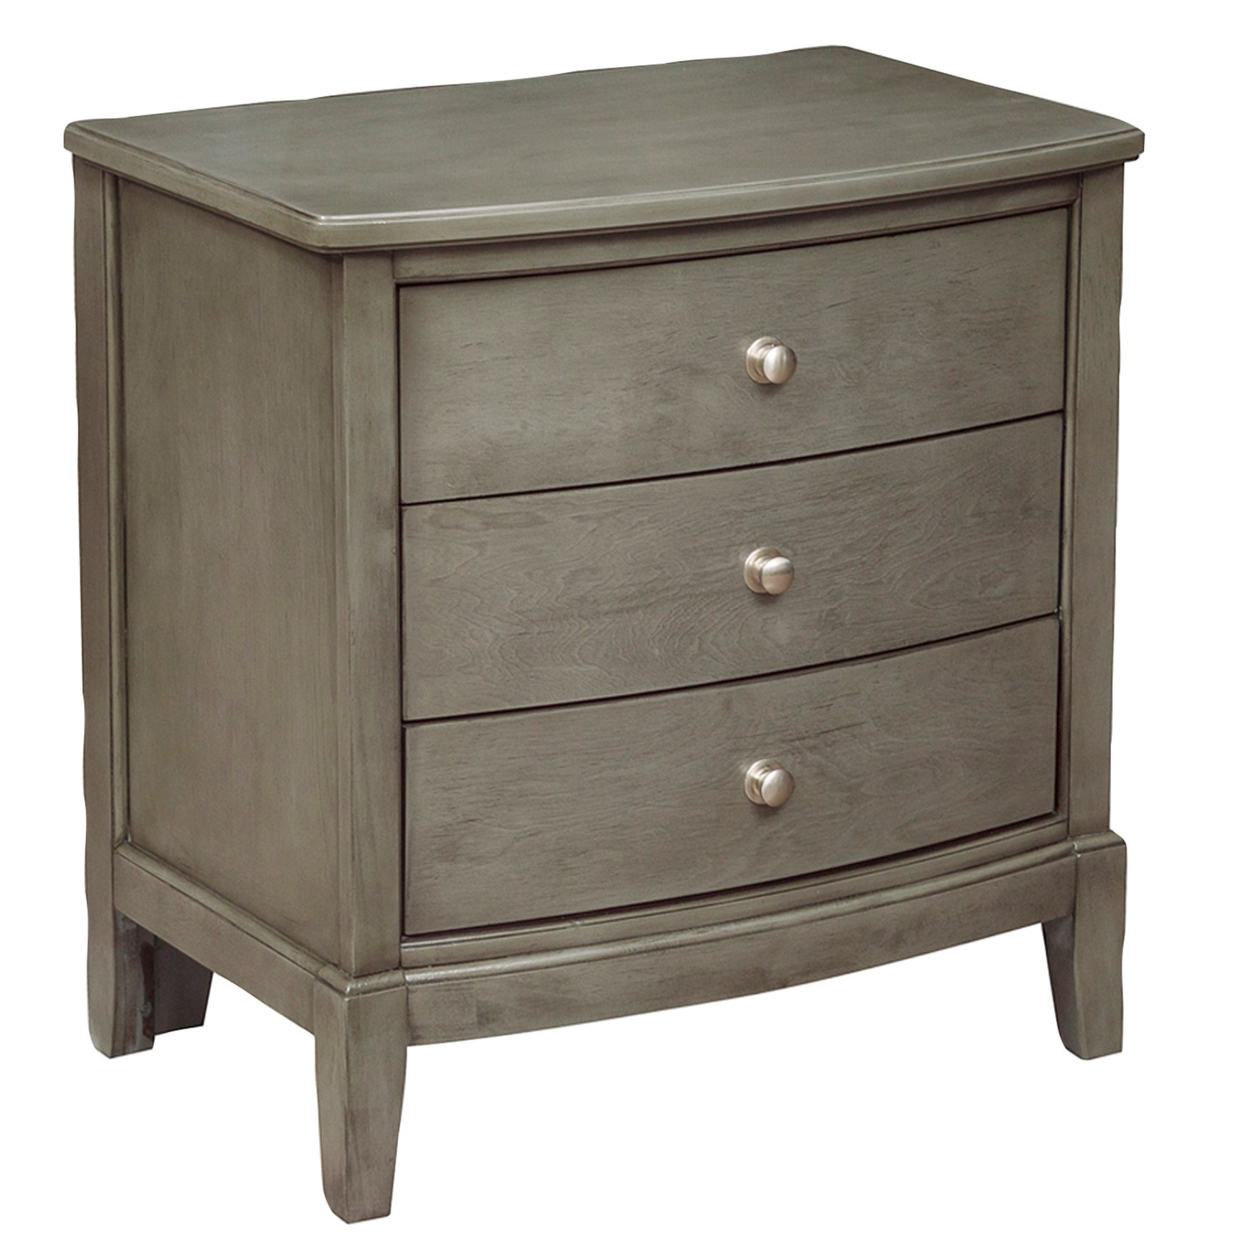 Wooden Nightstand With 3 Spacious Drawers And Knobs, Gray- Saltoro Sherpi